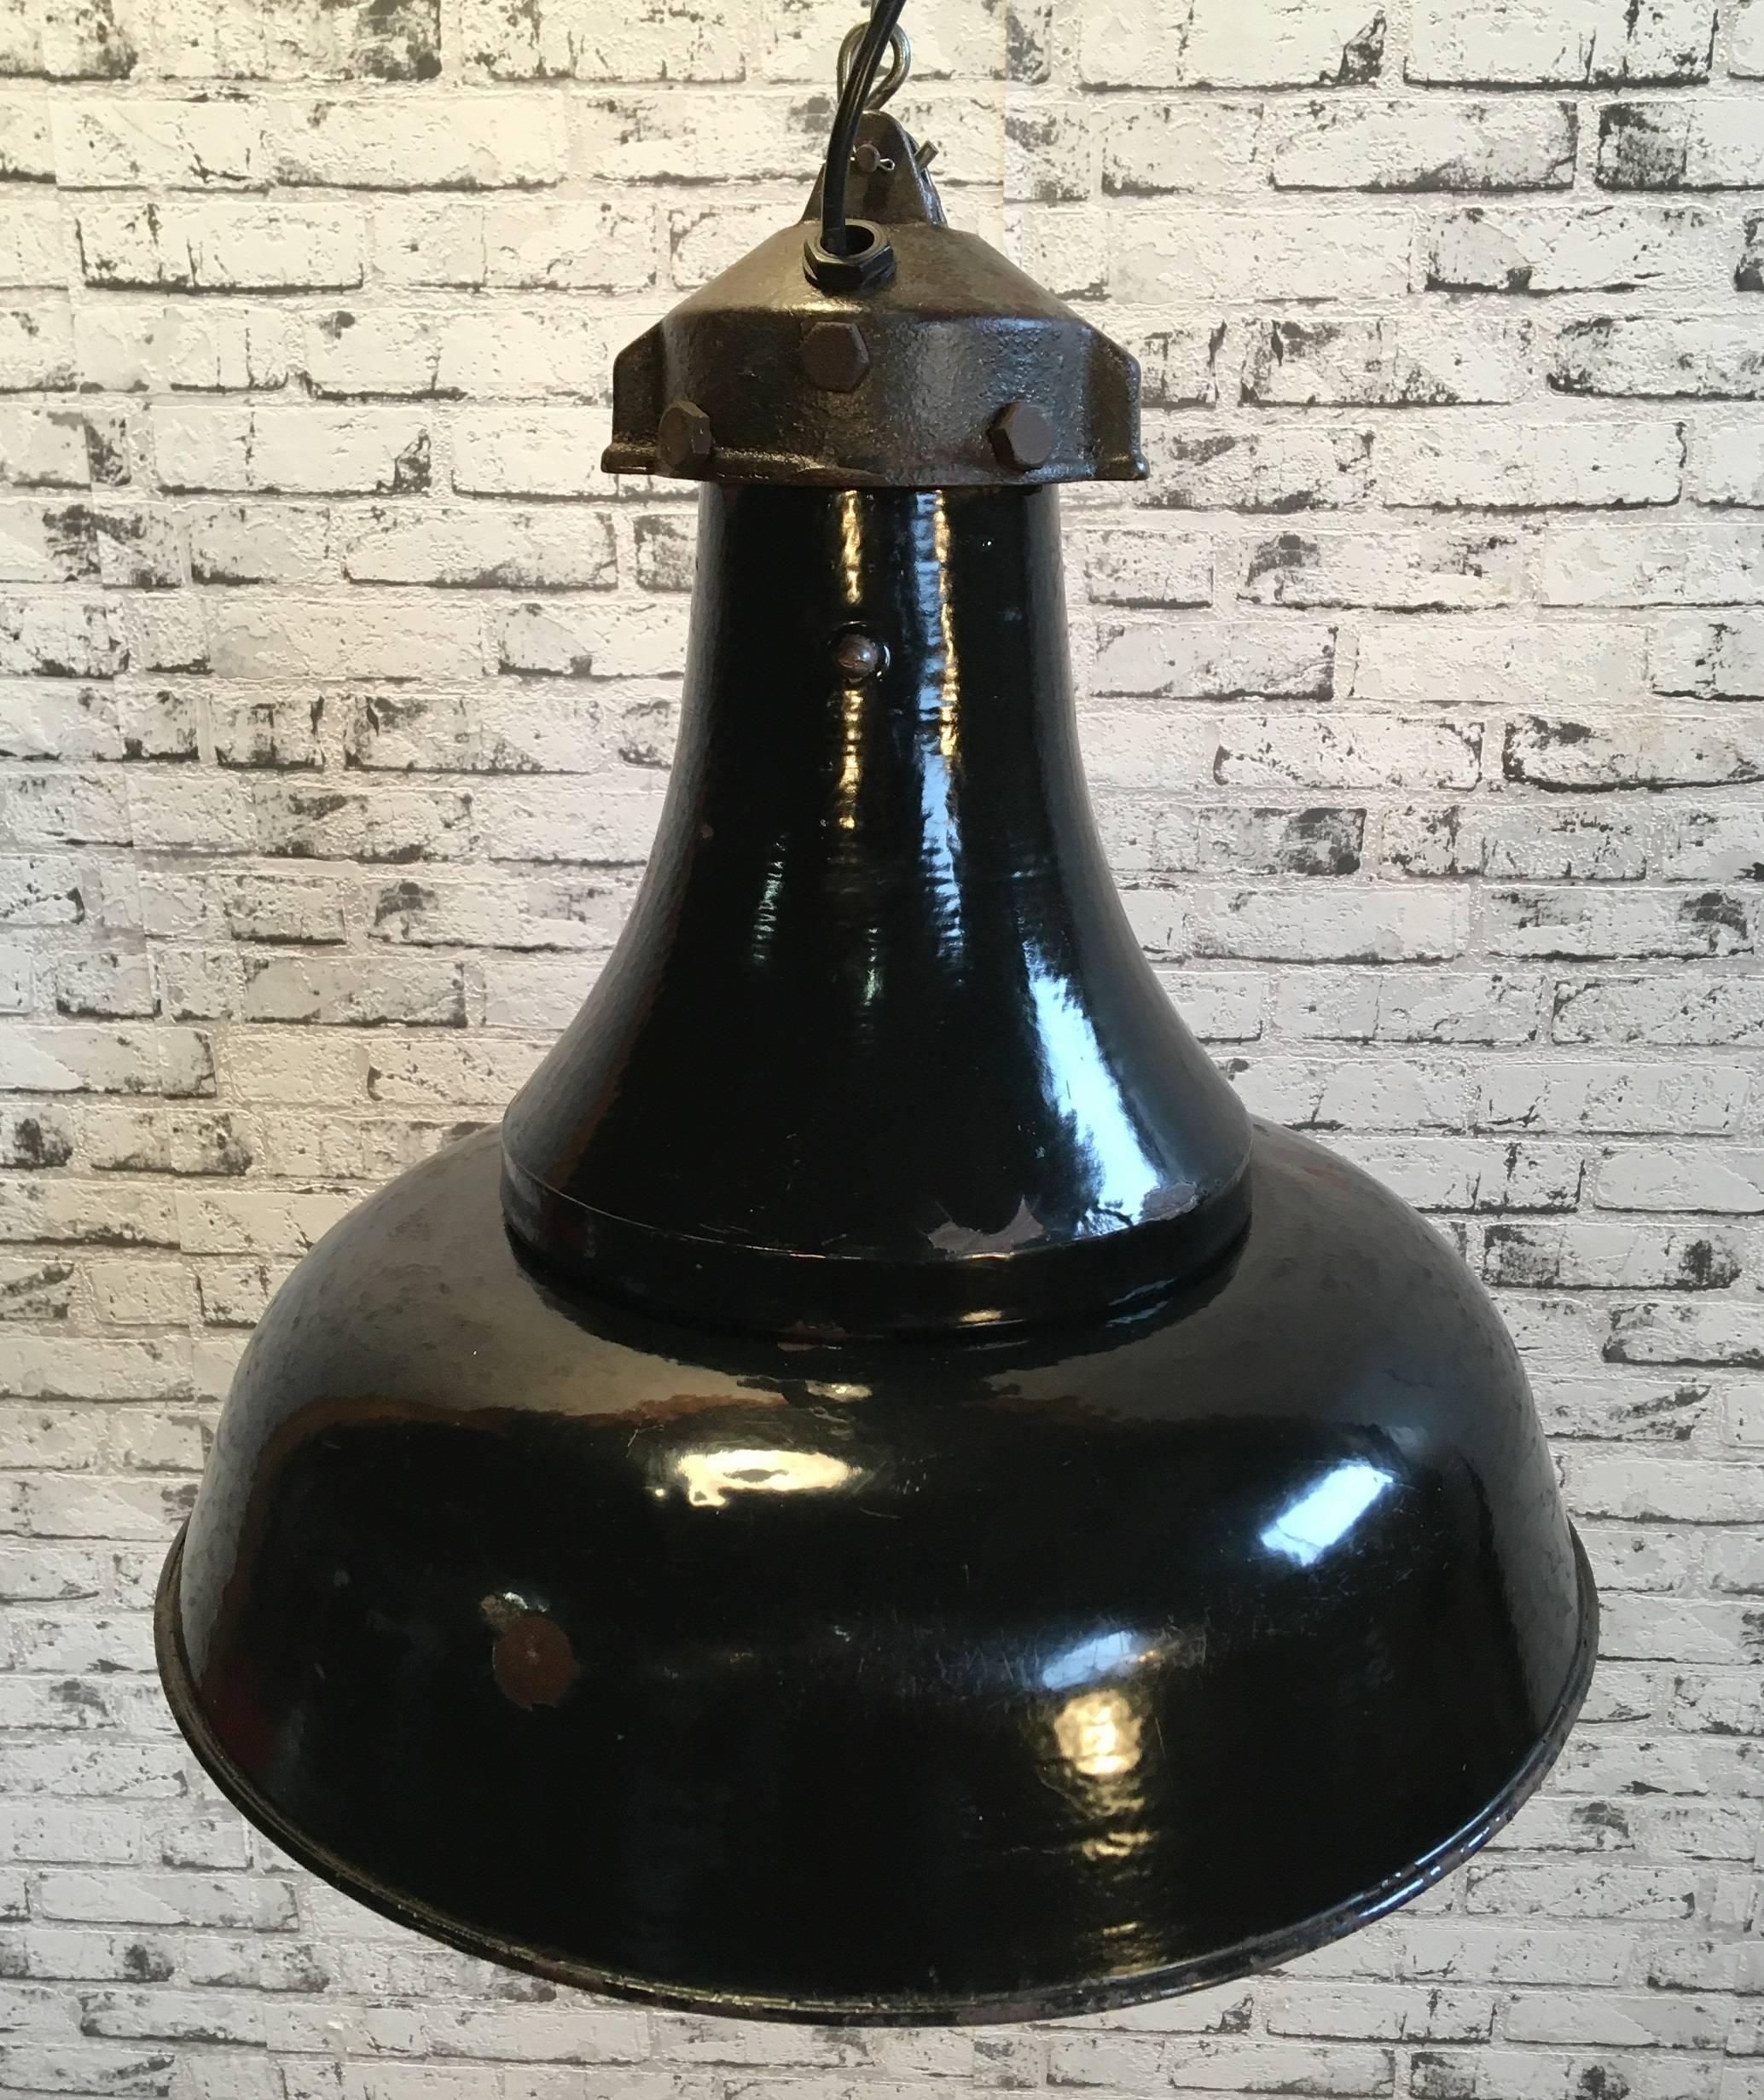 Very old industrial pendant lamp. Used in factories in former Czechoslovakia,1920s.
Cast iron top. New wiring and E27 socket.
Weight: 5 kg.